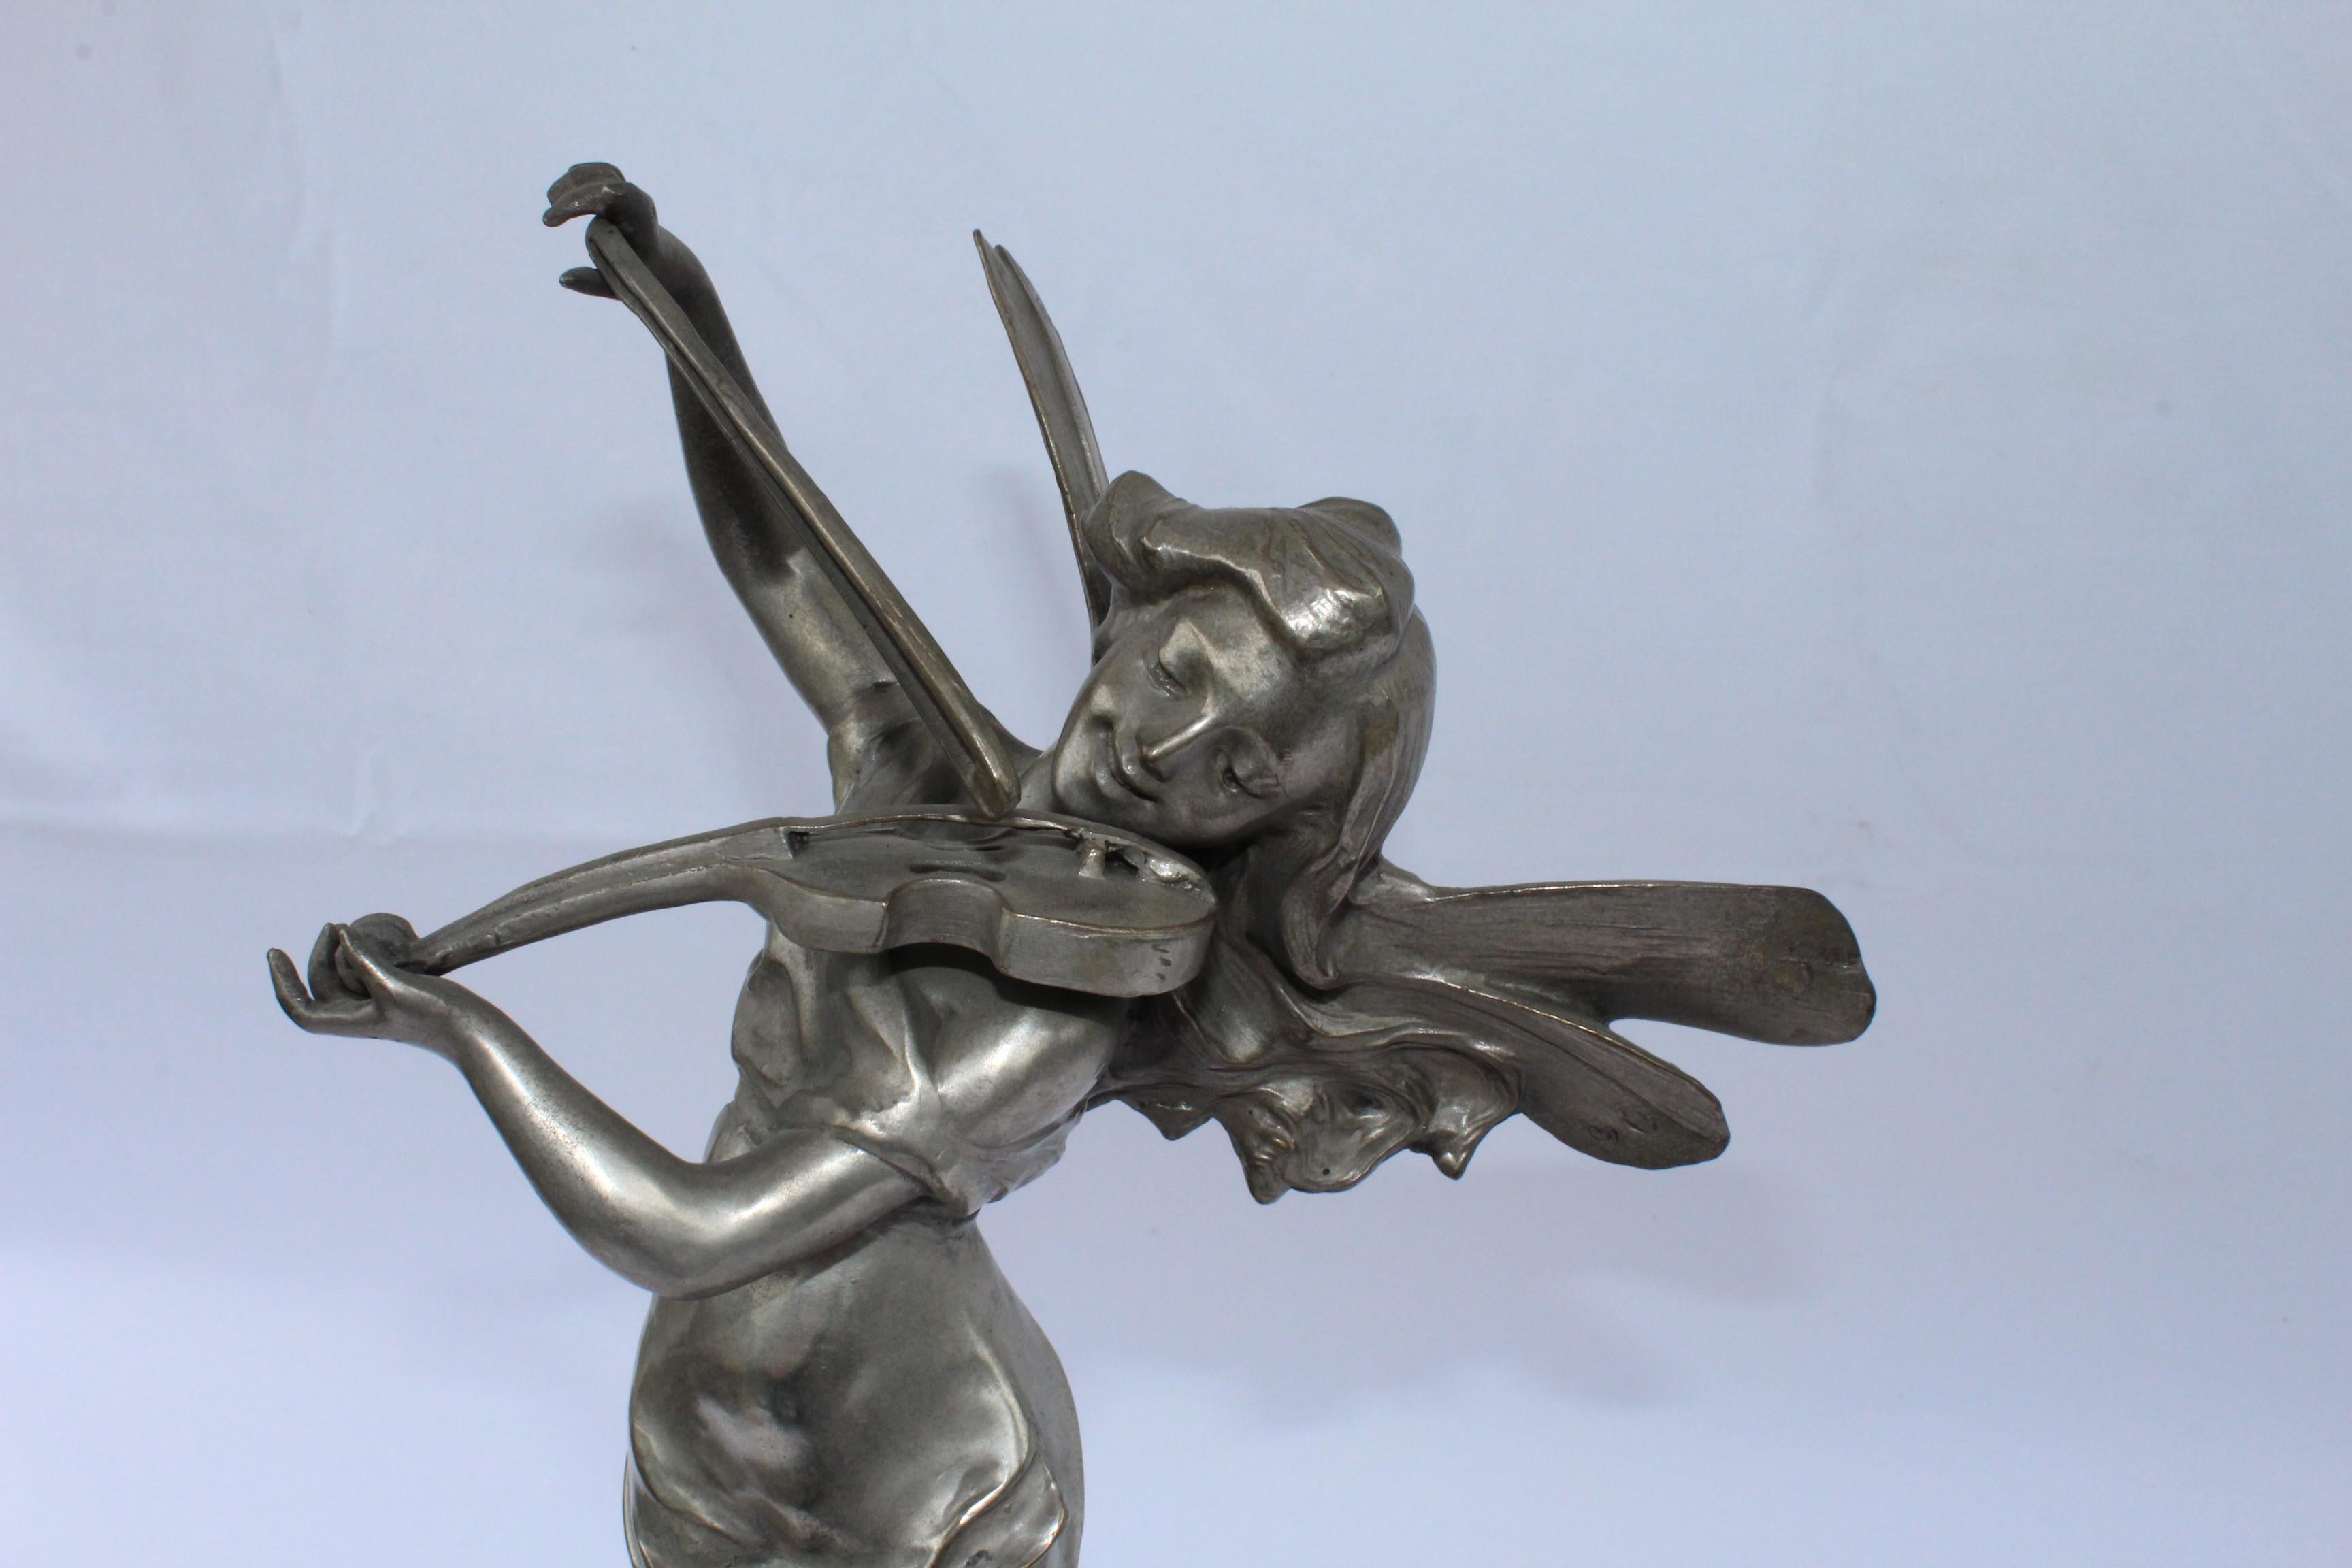 A fantasy figurine of a young girl Pixy playing the Violin. Standing on a pedestal with Cherubs all around with silver patina finish. All mounted on absolute Black marble base. Bears the sign of Aug Moreau. At 21